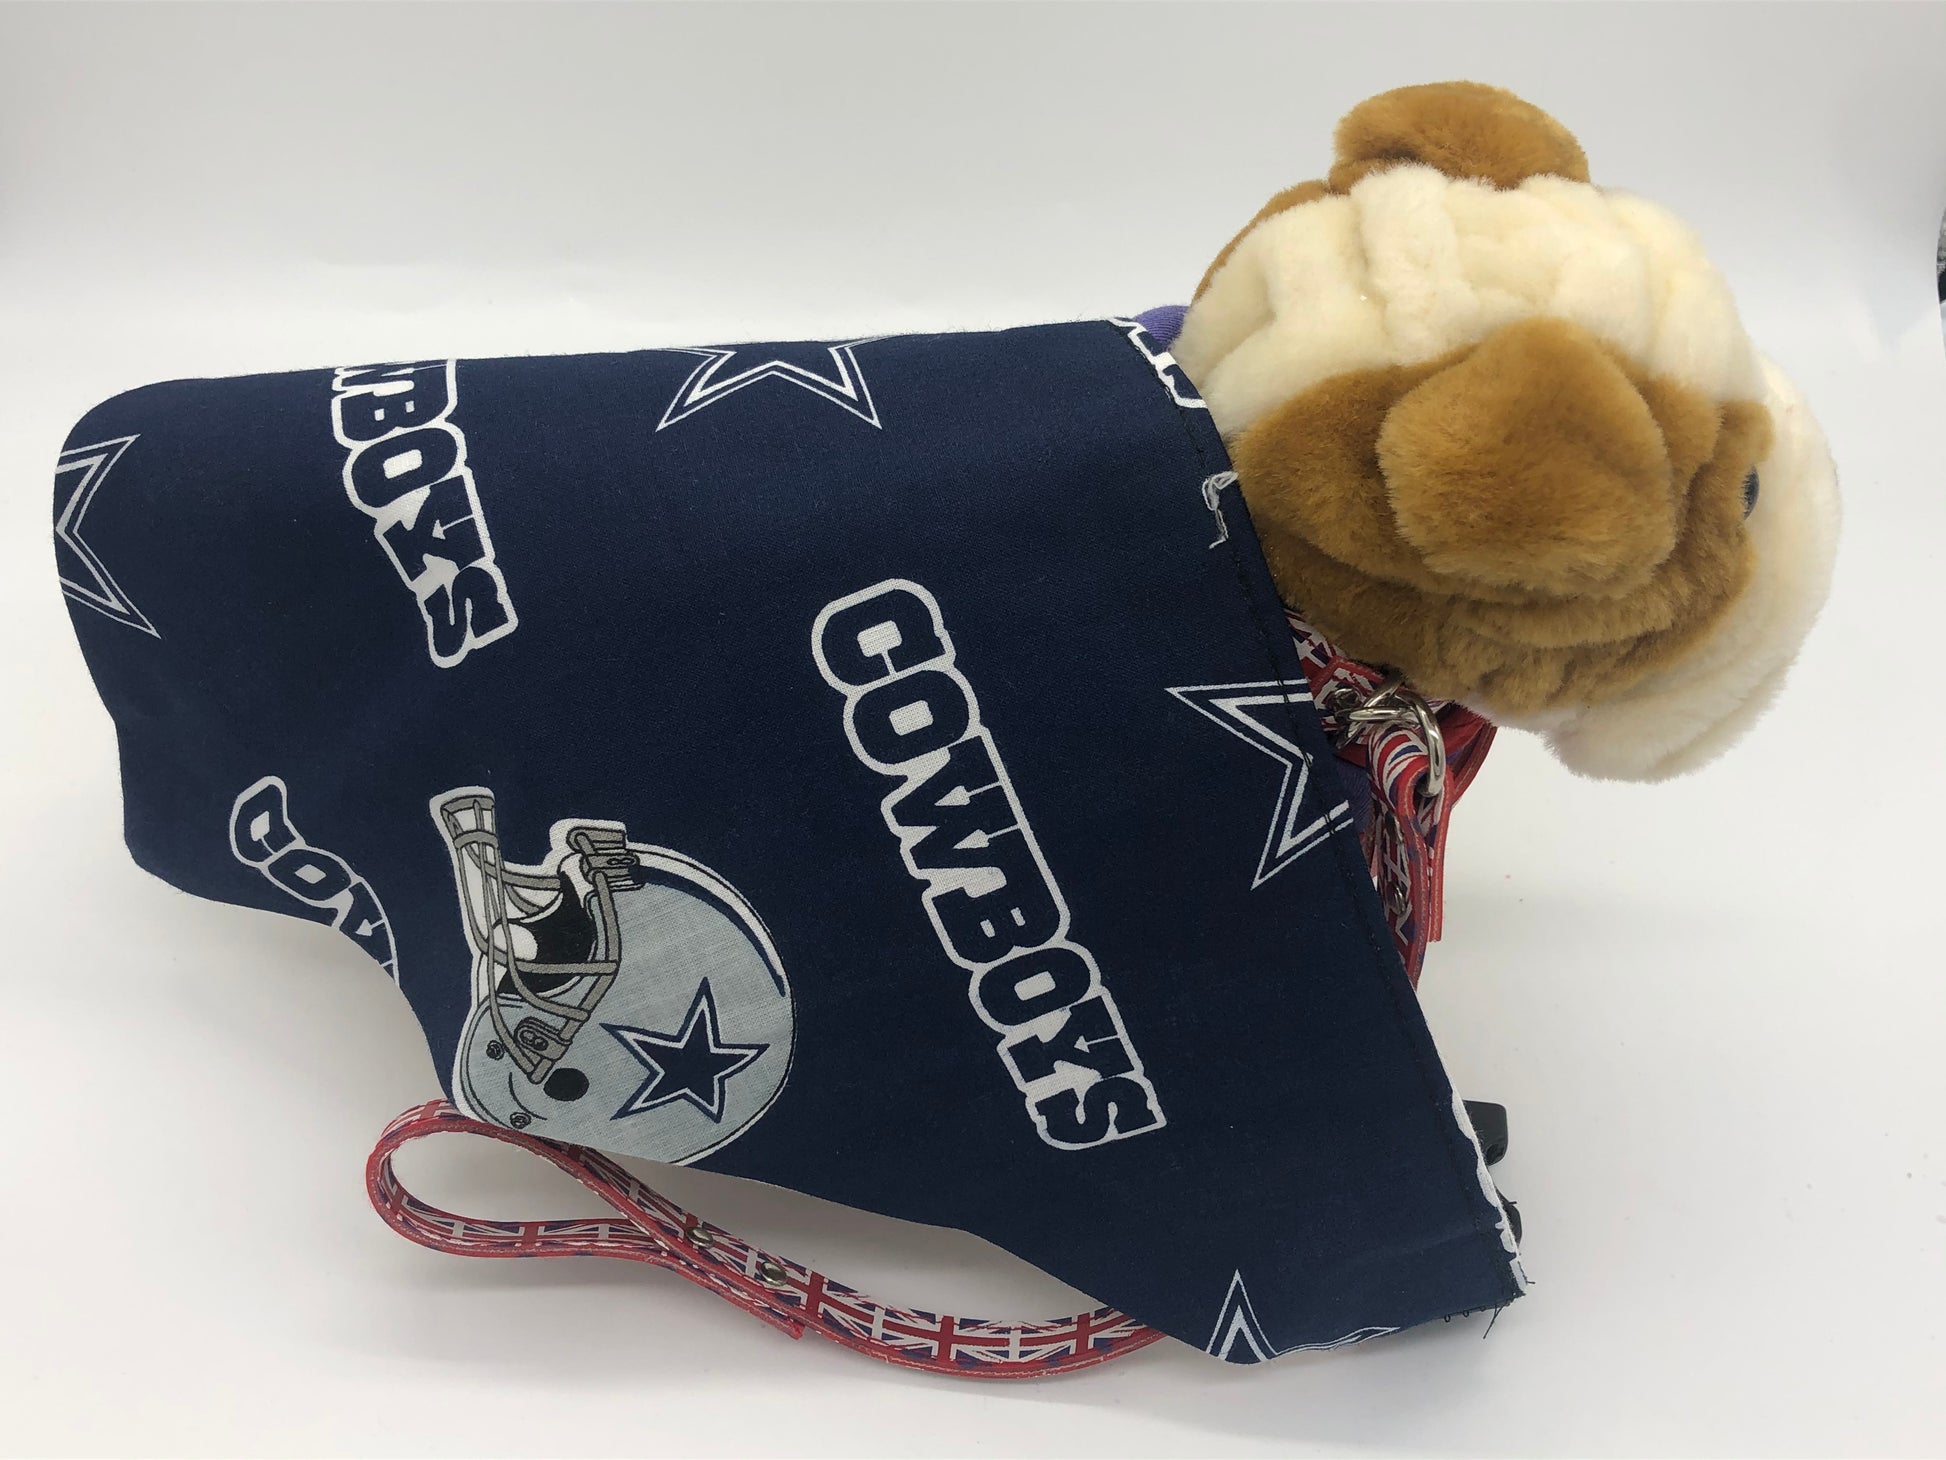 Photo of a small stuffed brown and cream dog with a Navy and grey triangular bandana with the Cowboys logo, star and helmet across it's back.